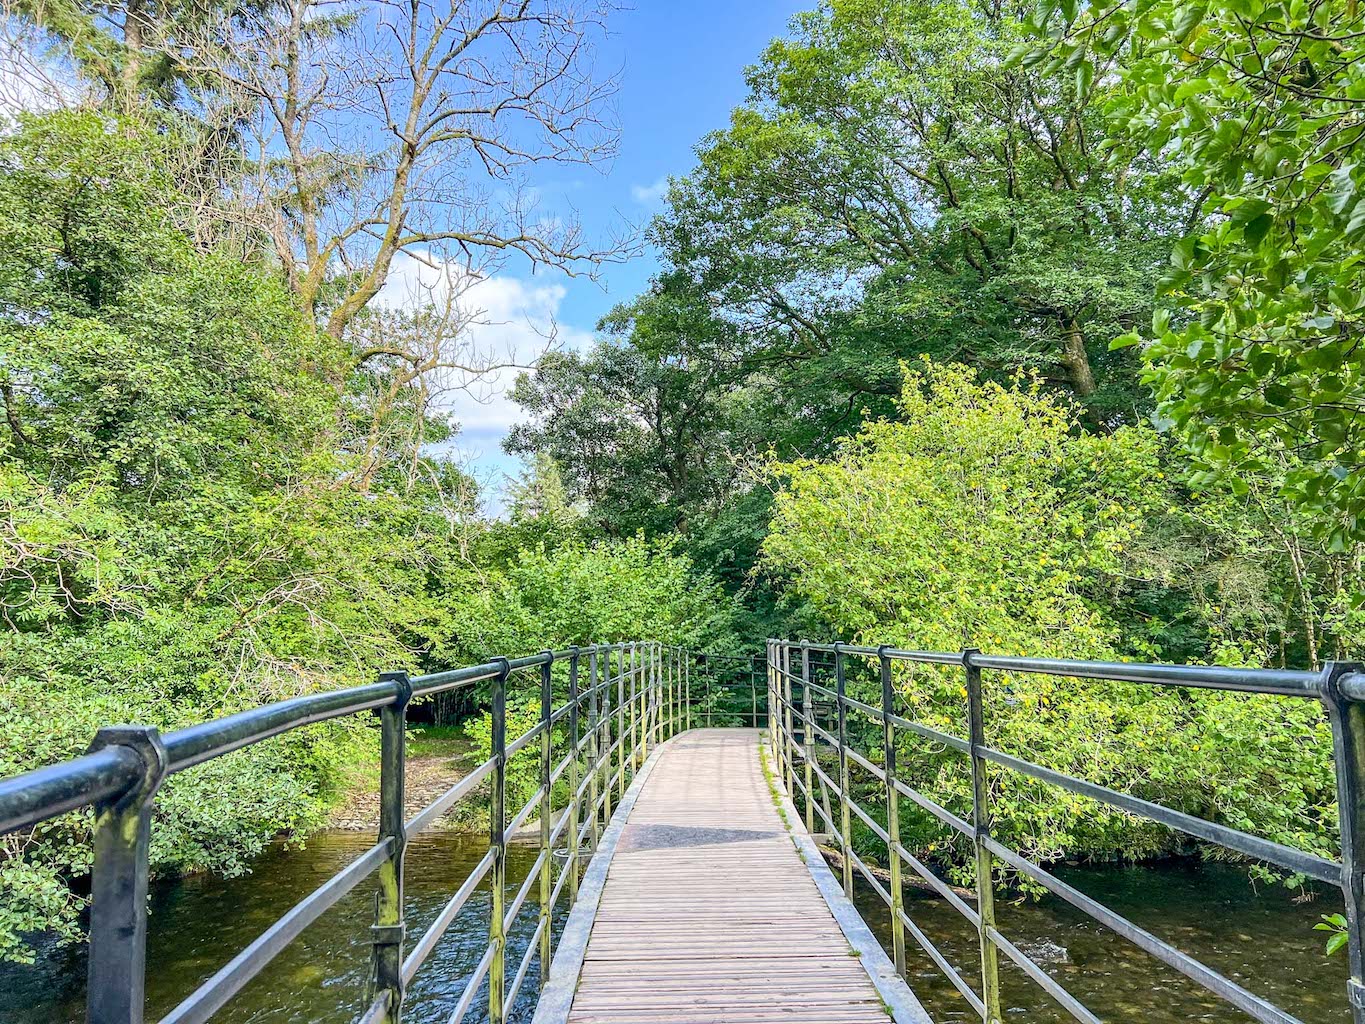 bridge across river Rothay to Rydal Caves, Rydal Caves walk